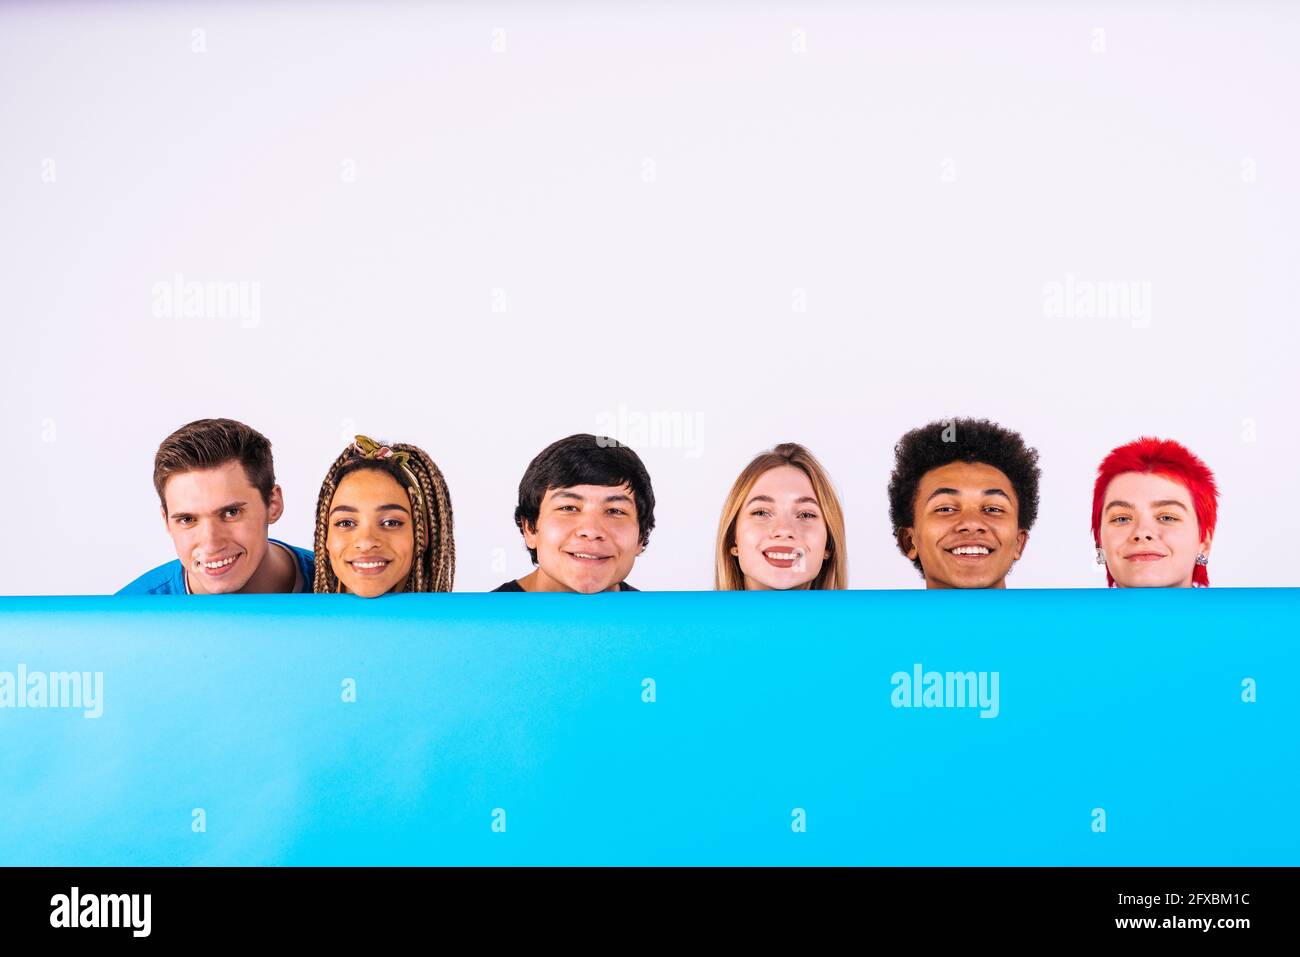 Smiling multi-ethnic male and female friends behind blue backdrop Stock Photo